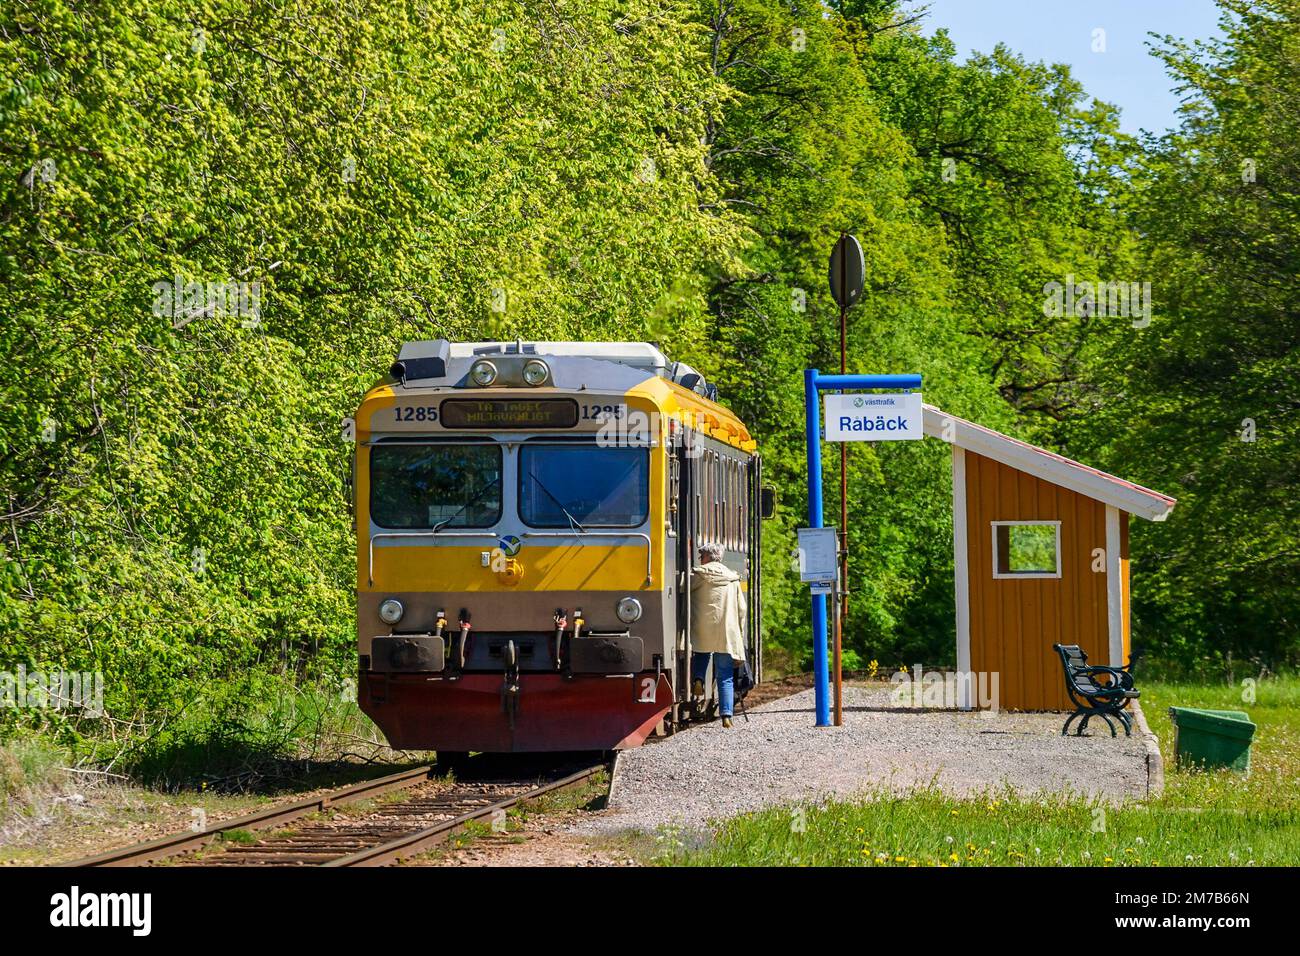 Train stop in the countryside Stock Photo